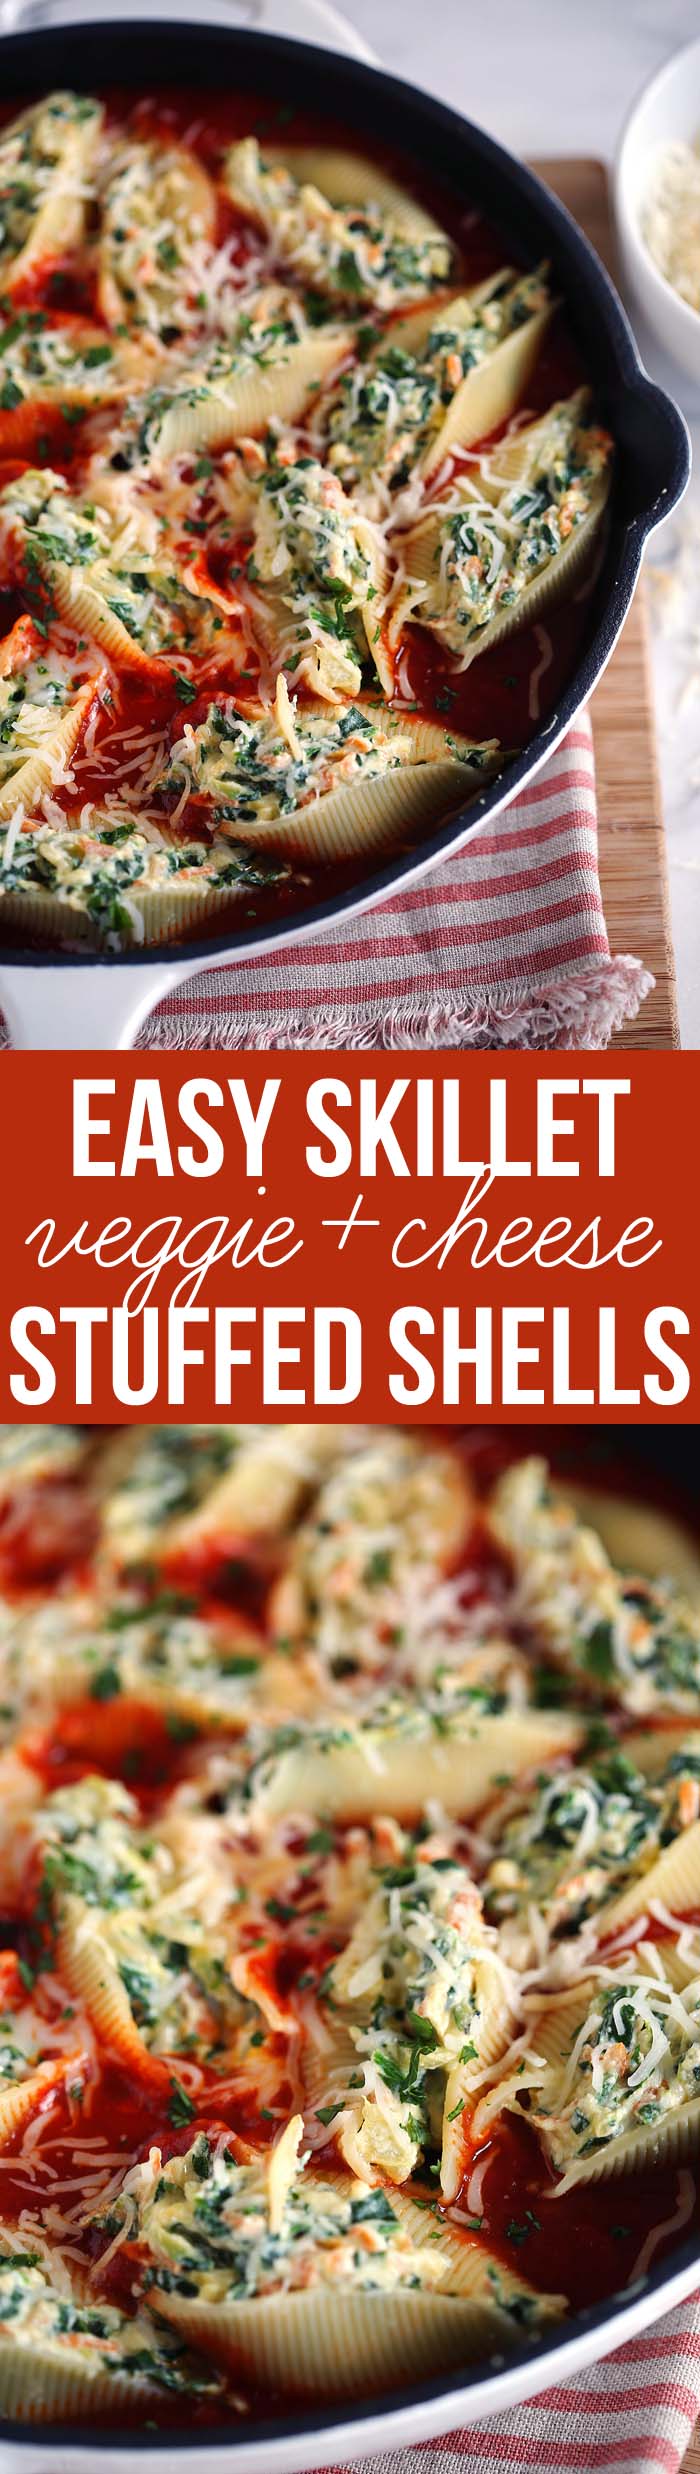 Our family's FAVORITE Skillet Veggie and Cheese Stuffed Shells - the perfect weeknight meal that is delicious and easy to freeze!  eat-yourself-skinny.com